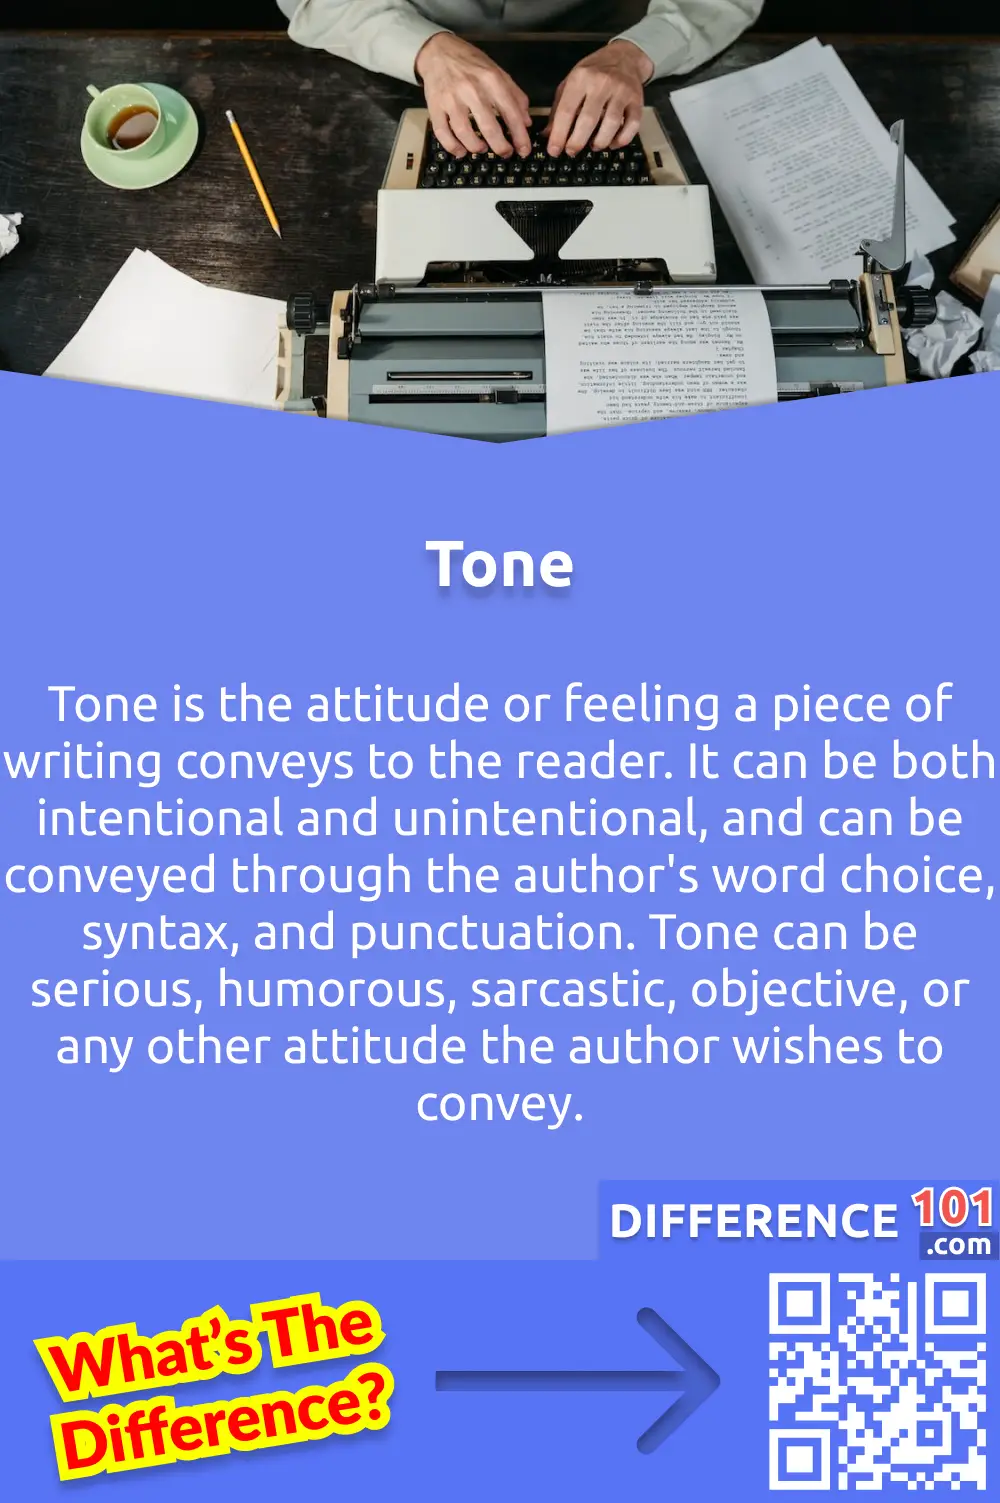 What Is Tone? Tone is the attitude or feeling a piece of writing conveys to the reader. It can be both intentional and unintentional, and can be conveyed through the author's word choice, syntax, and punctuation. Tone can be serious, humorous, sarcastic, objective, or any other attitude the author wishes to convey. Tone can also be affected by the author's choice of subject matter, the point of view they are writing from, and the emotional state of the author at the time of writing. It is important to take the tone of a piece of writing into consideration, as this can significantly affect the way the reader interprets the content.  